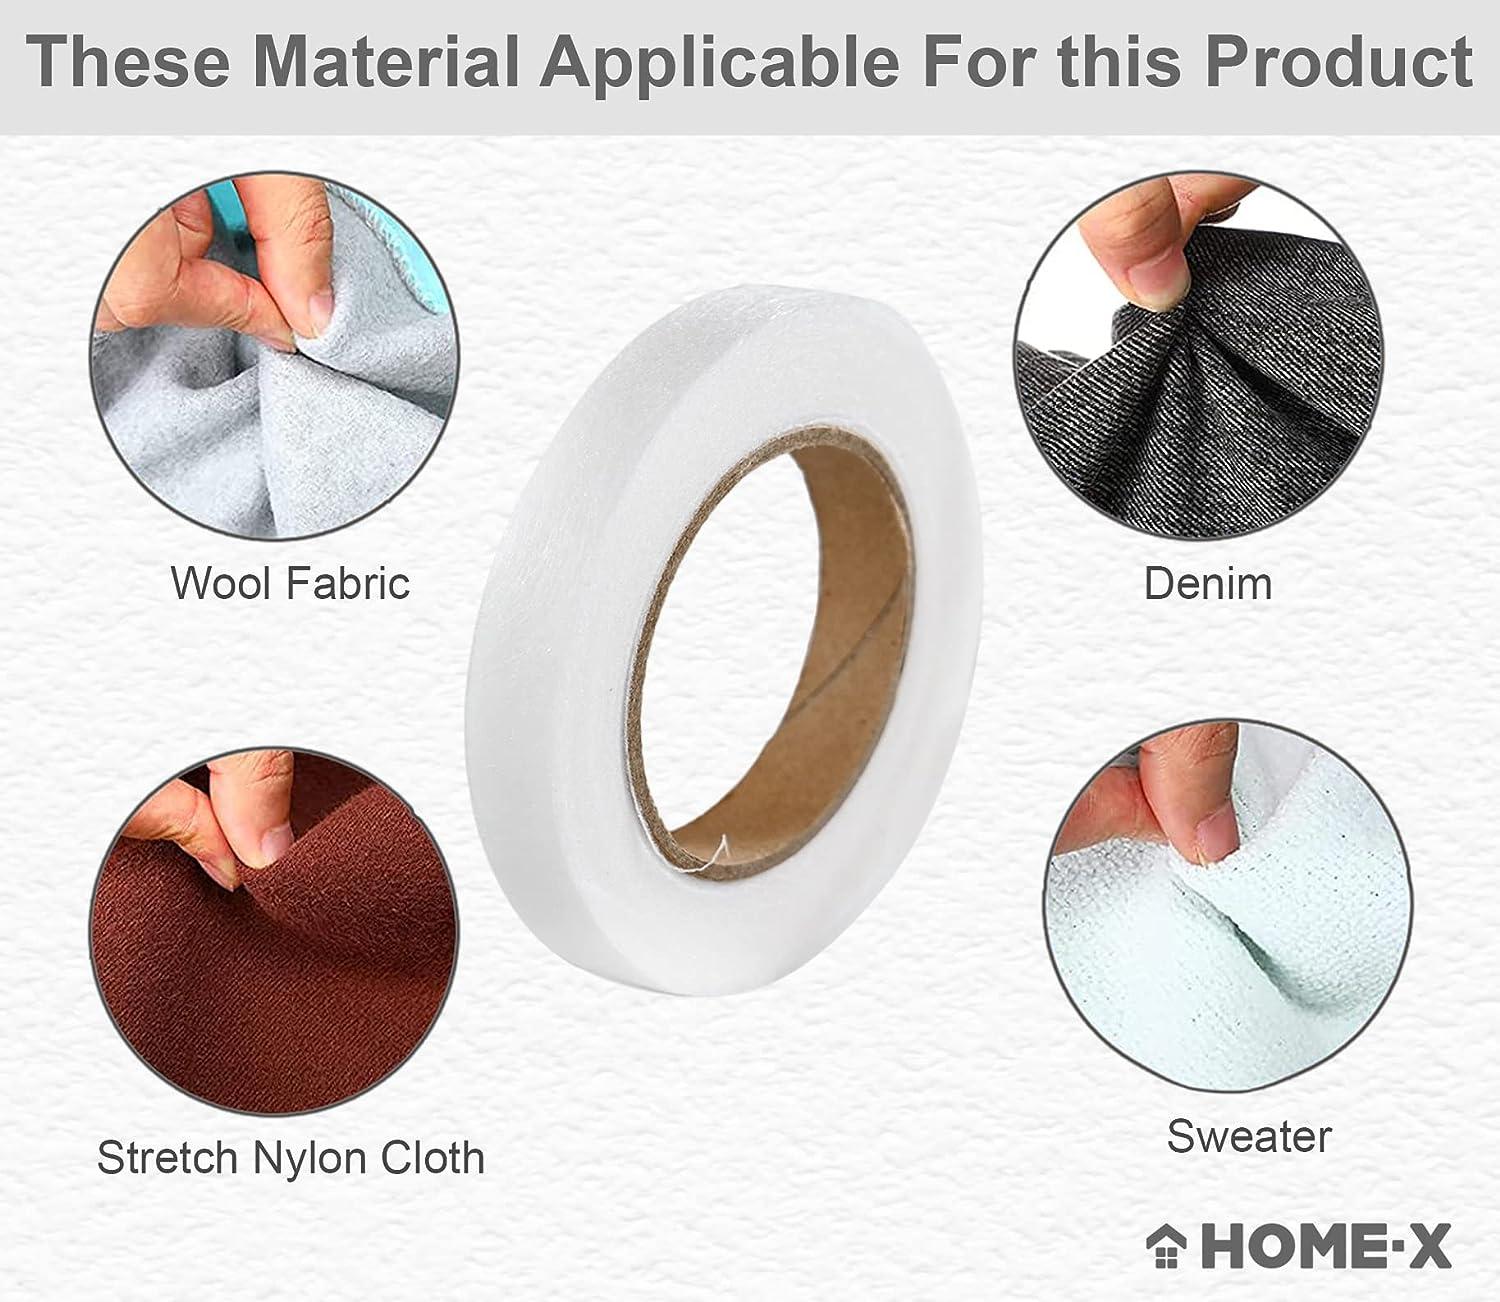 Adhesive Two Sided Fabric Tape no Sew Hem Tape for Hemming Pants